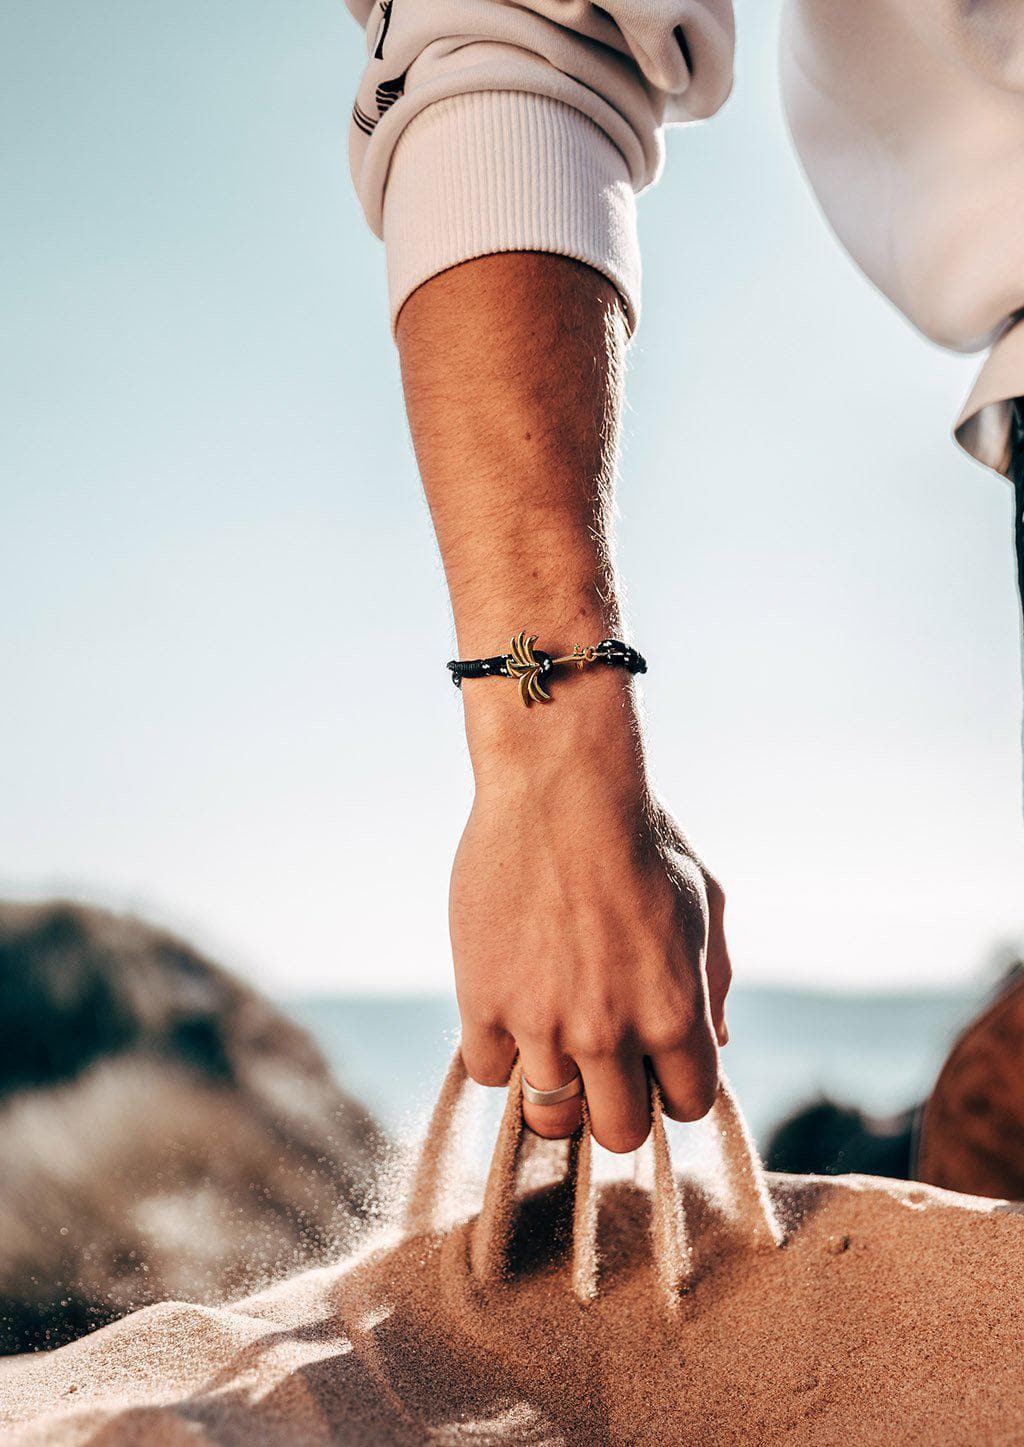 Trophy - Single - Season two Palm anchor bracelet with black and white nylon band. Male model on beach.